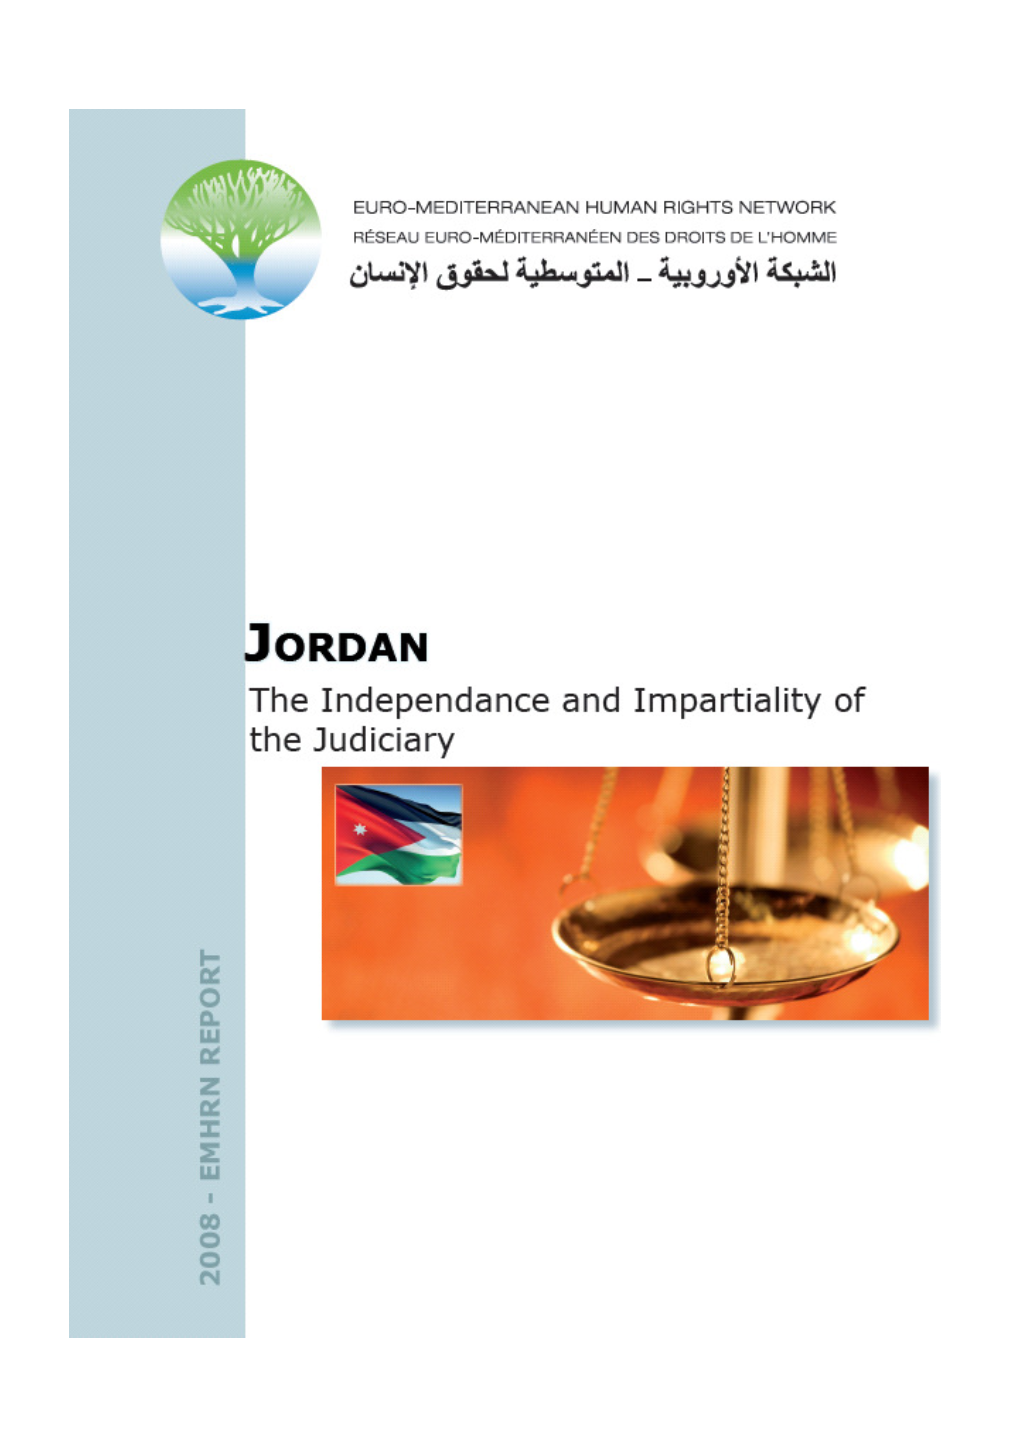 Jordan: the Independence and Impartiality of the Judiciary